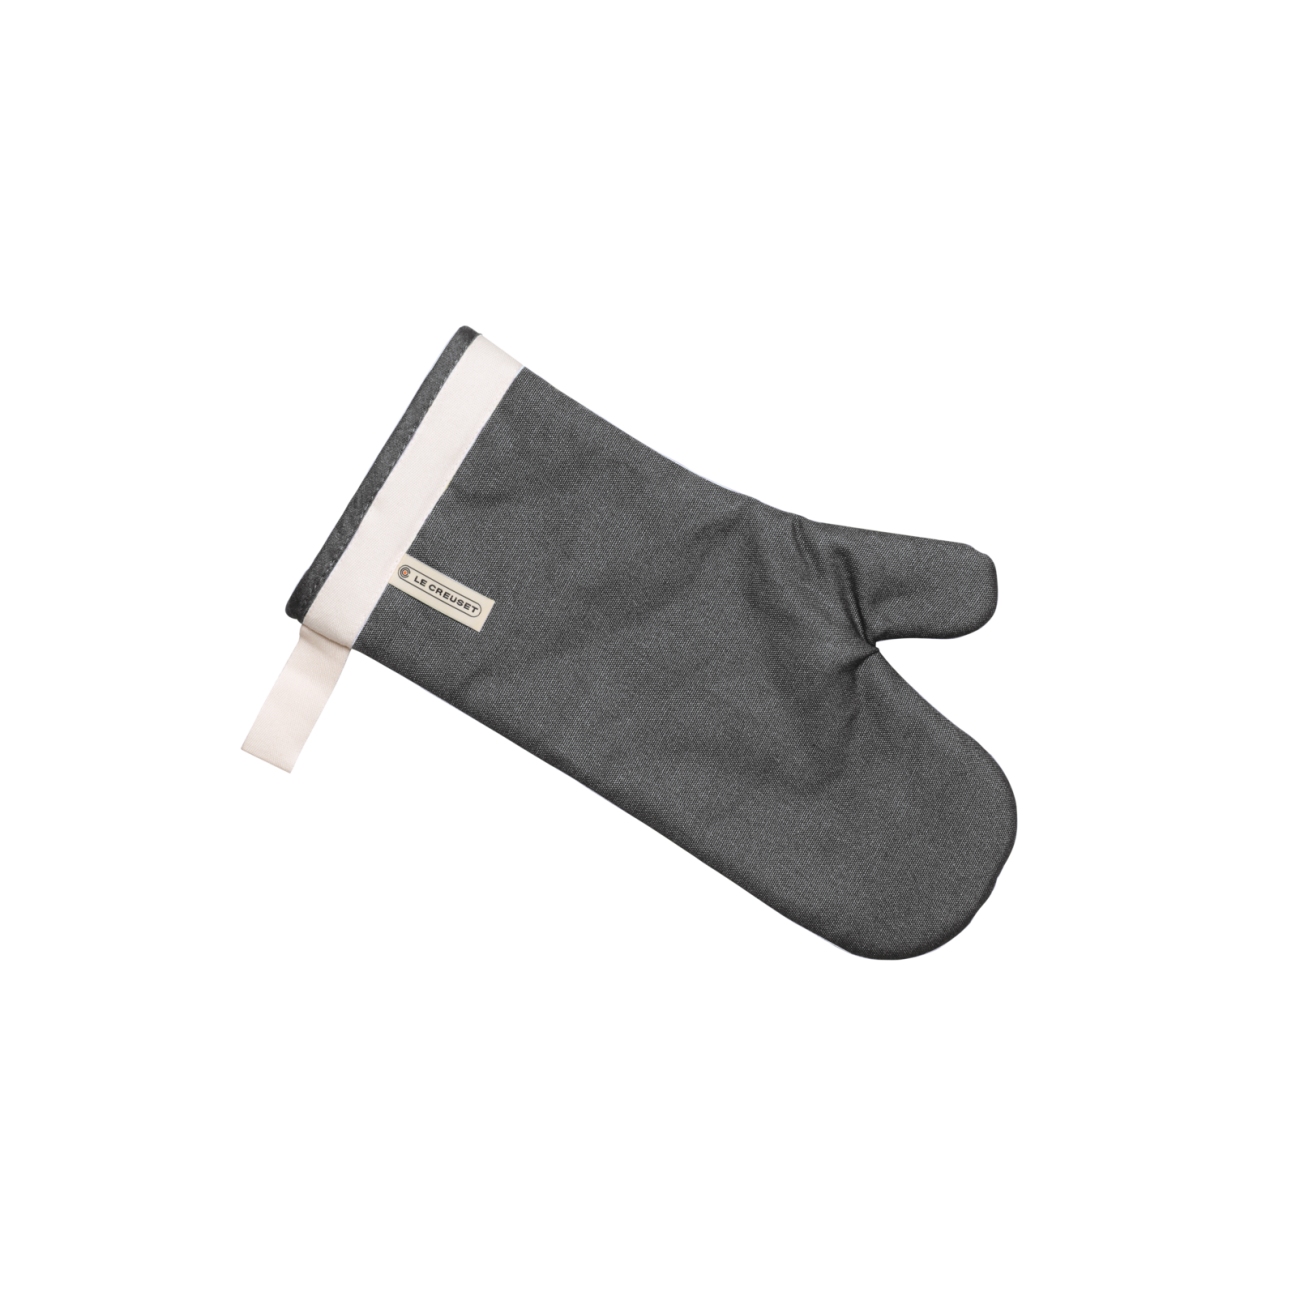 Le Creuset Oven glove